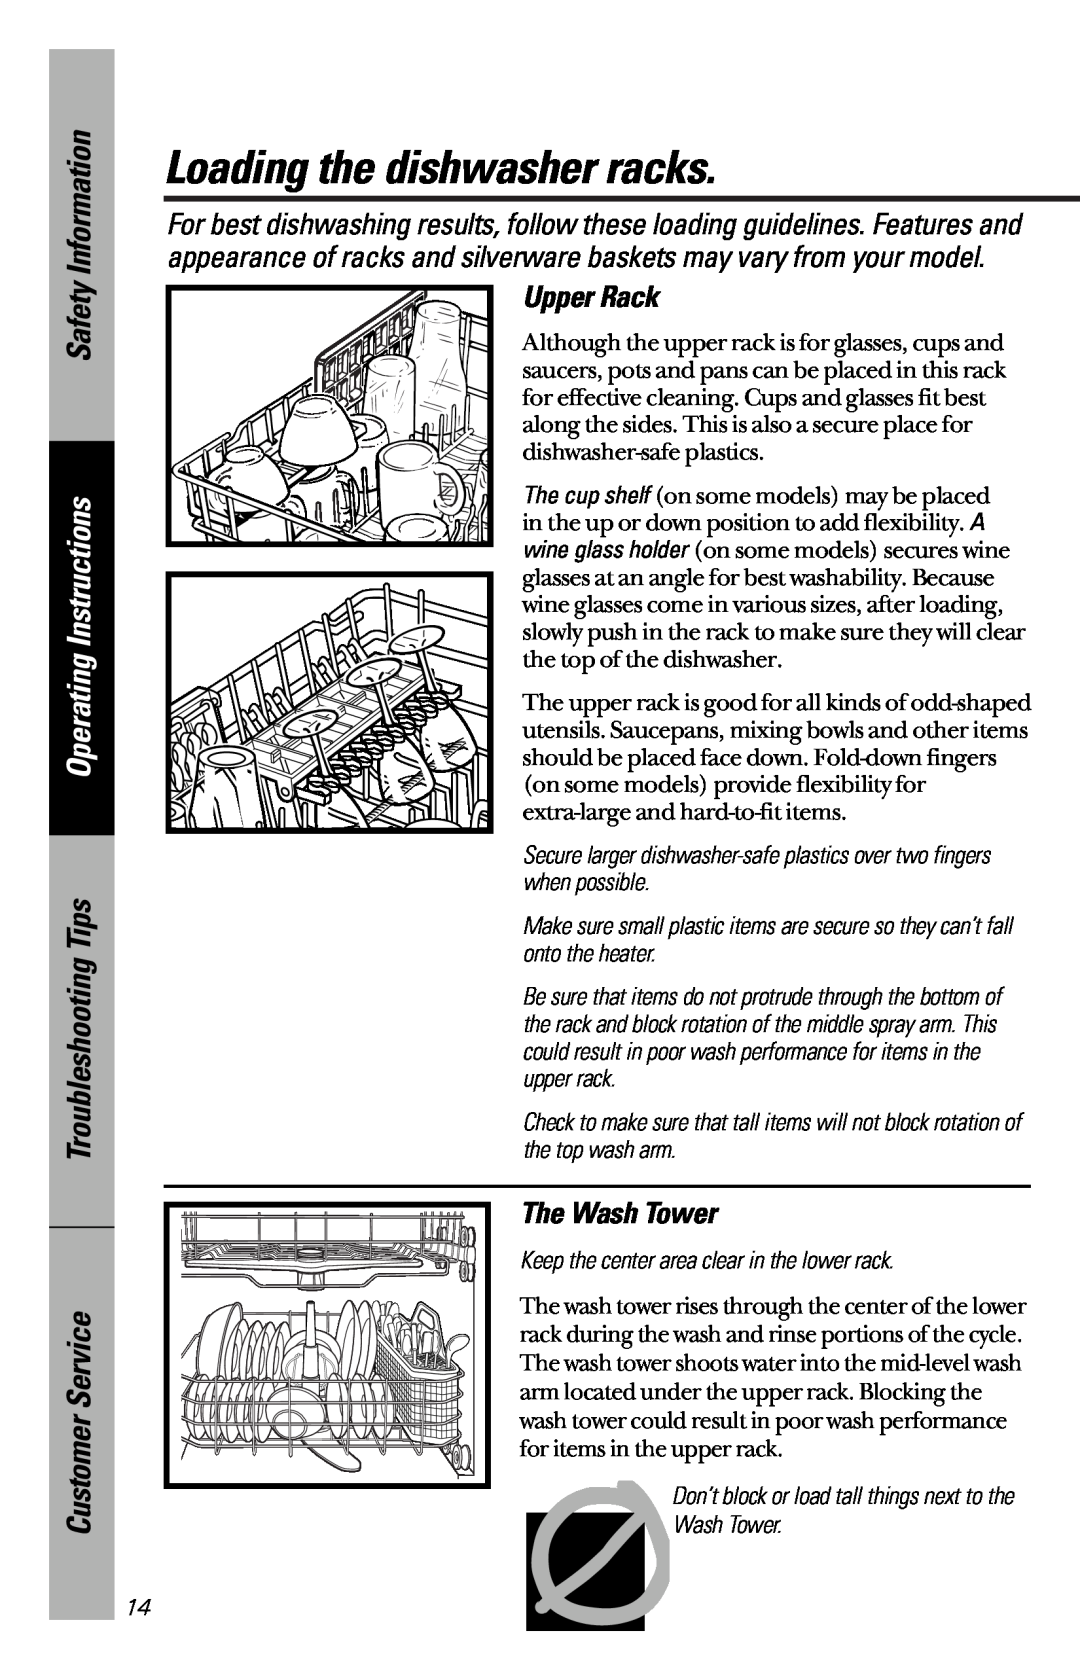 GE GSD5610, GSDL352 Loading the dishwasher racks, Upper Rack, The Wash Tower, Safety Information, Operating Instructions 